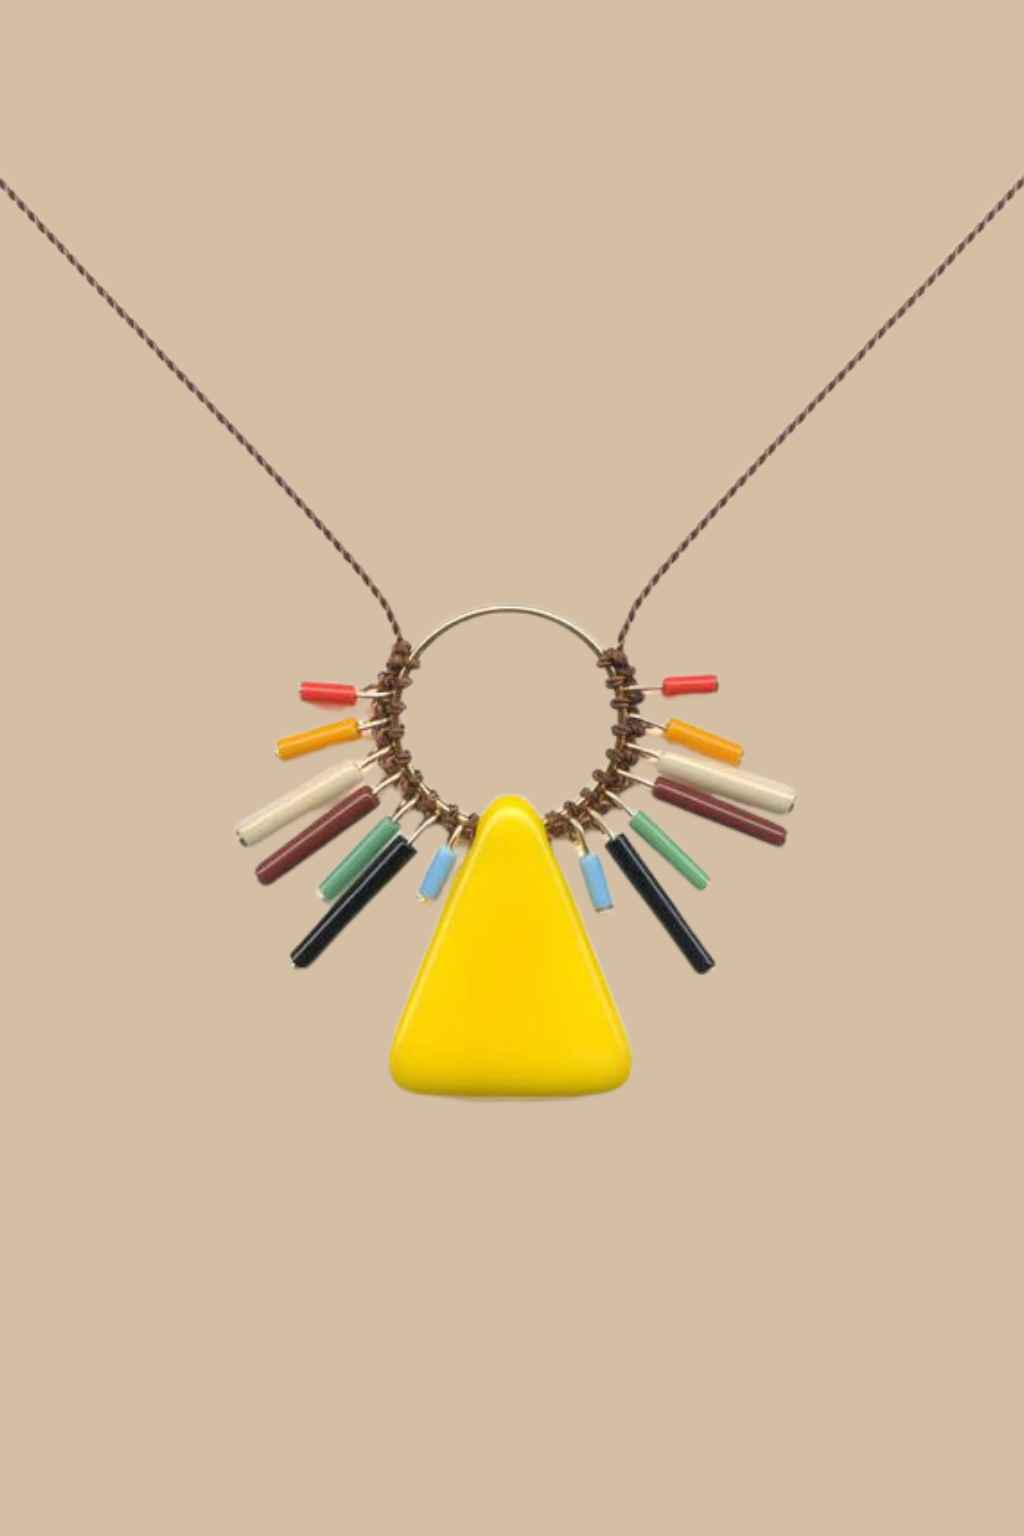 Hilma af Klimt Necklace with Yellow Triangle